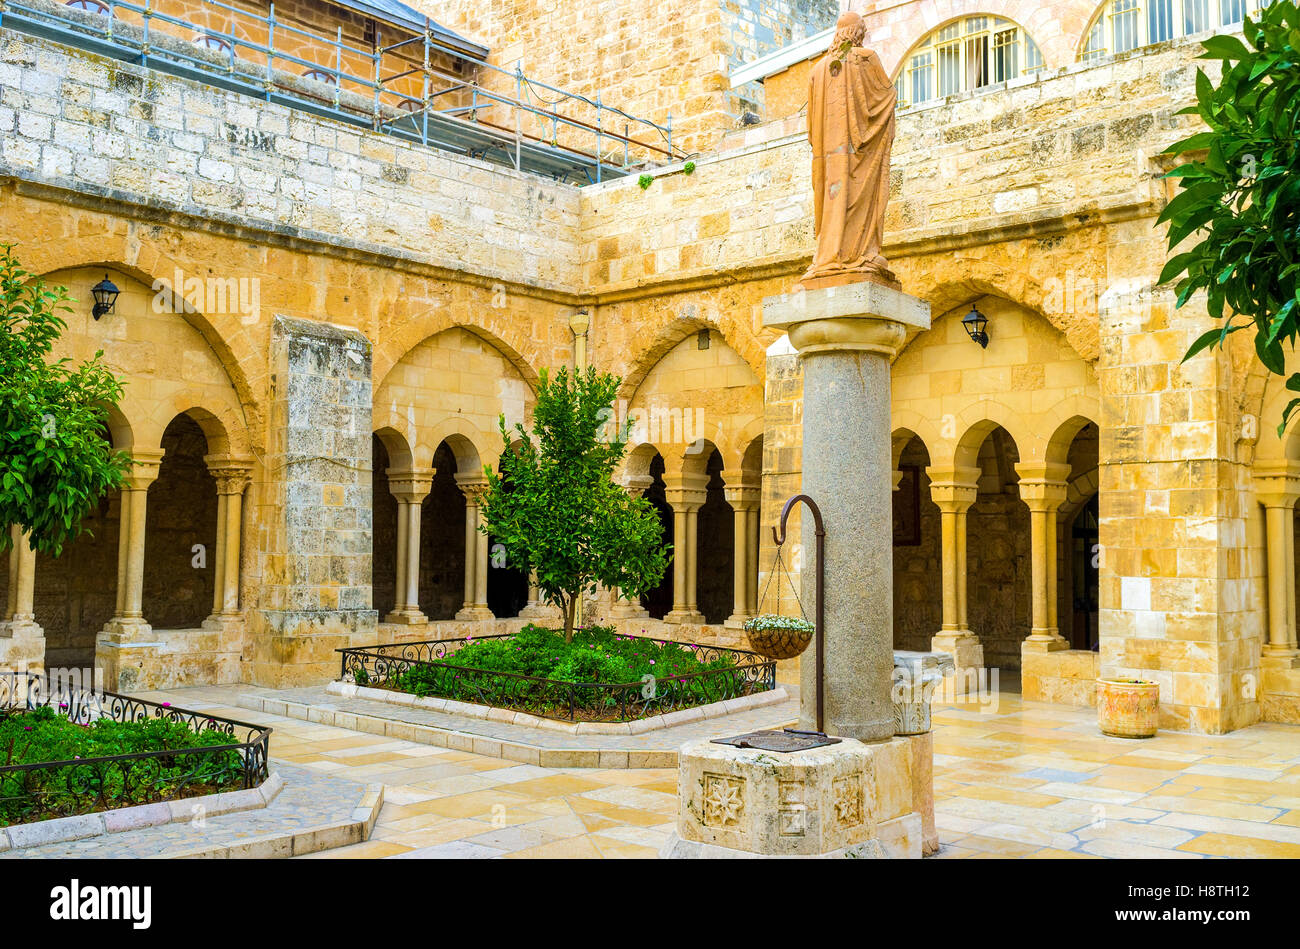 The inner courtyard of the Church of the Nativity Stock Photo